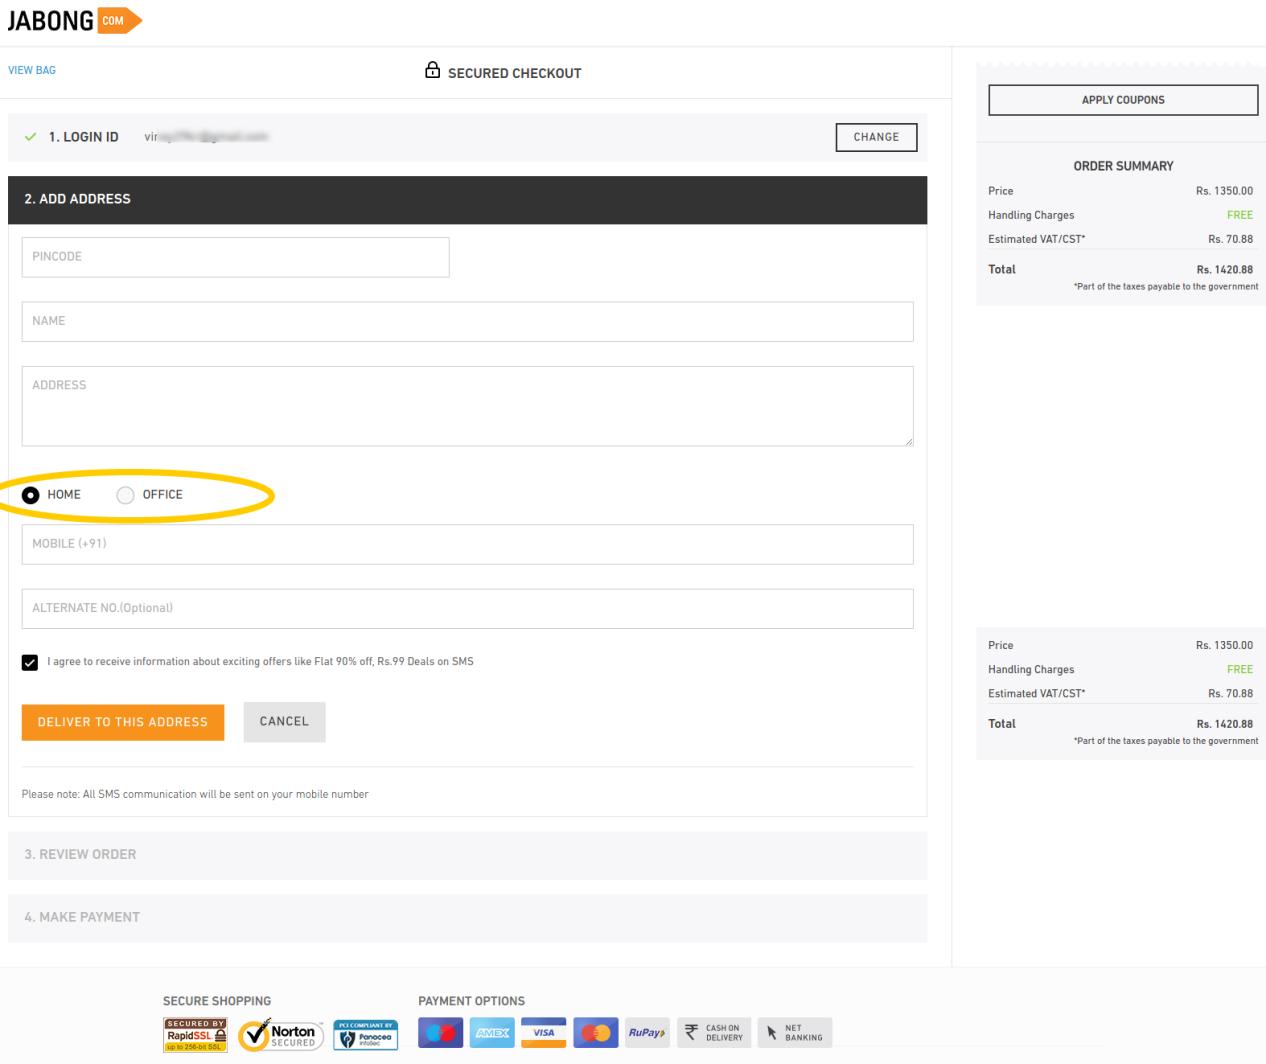 Jabong's Secured Checkout Page with more Options